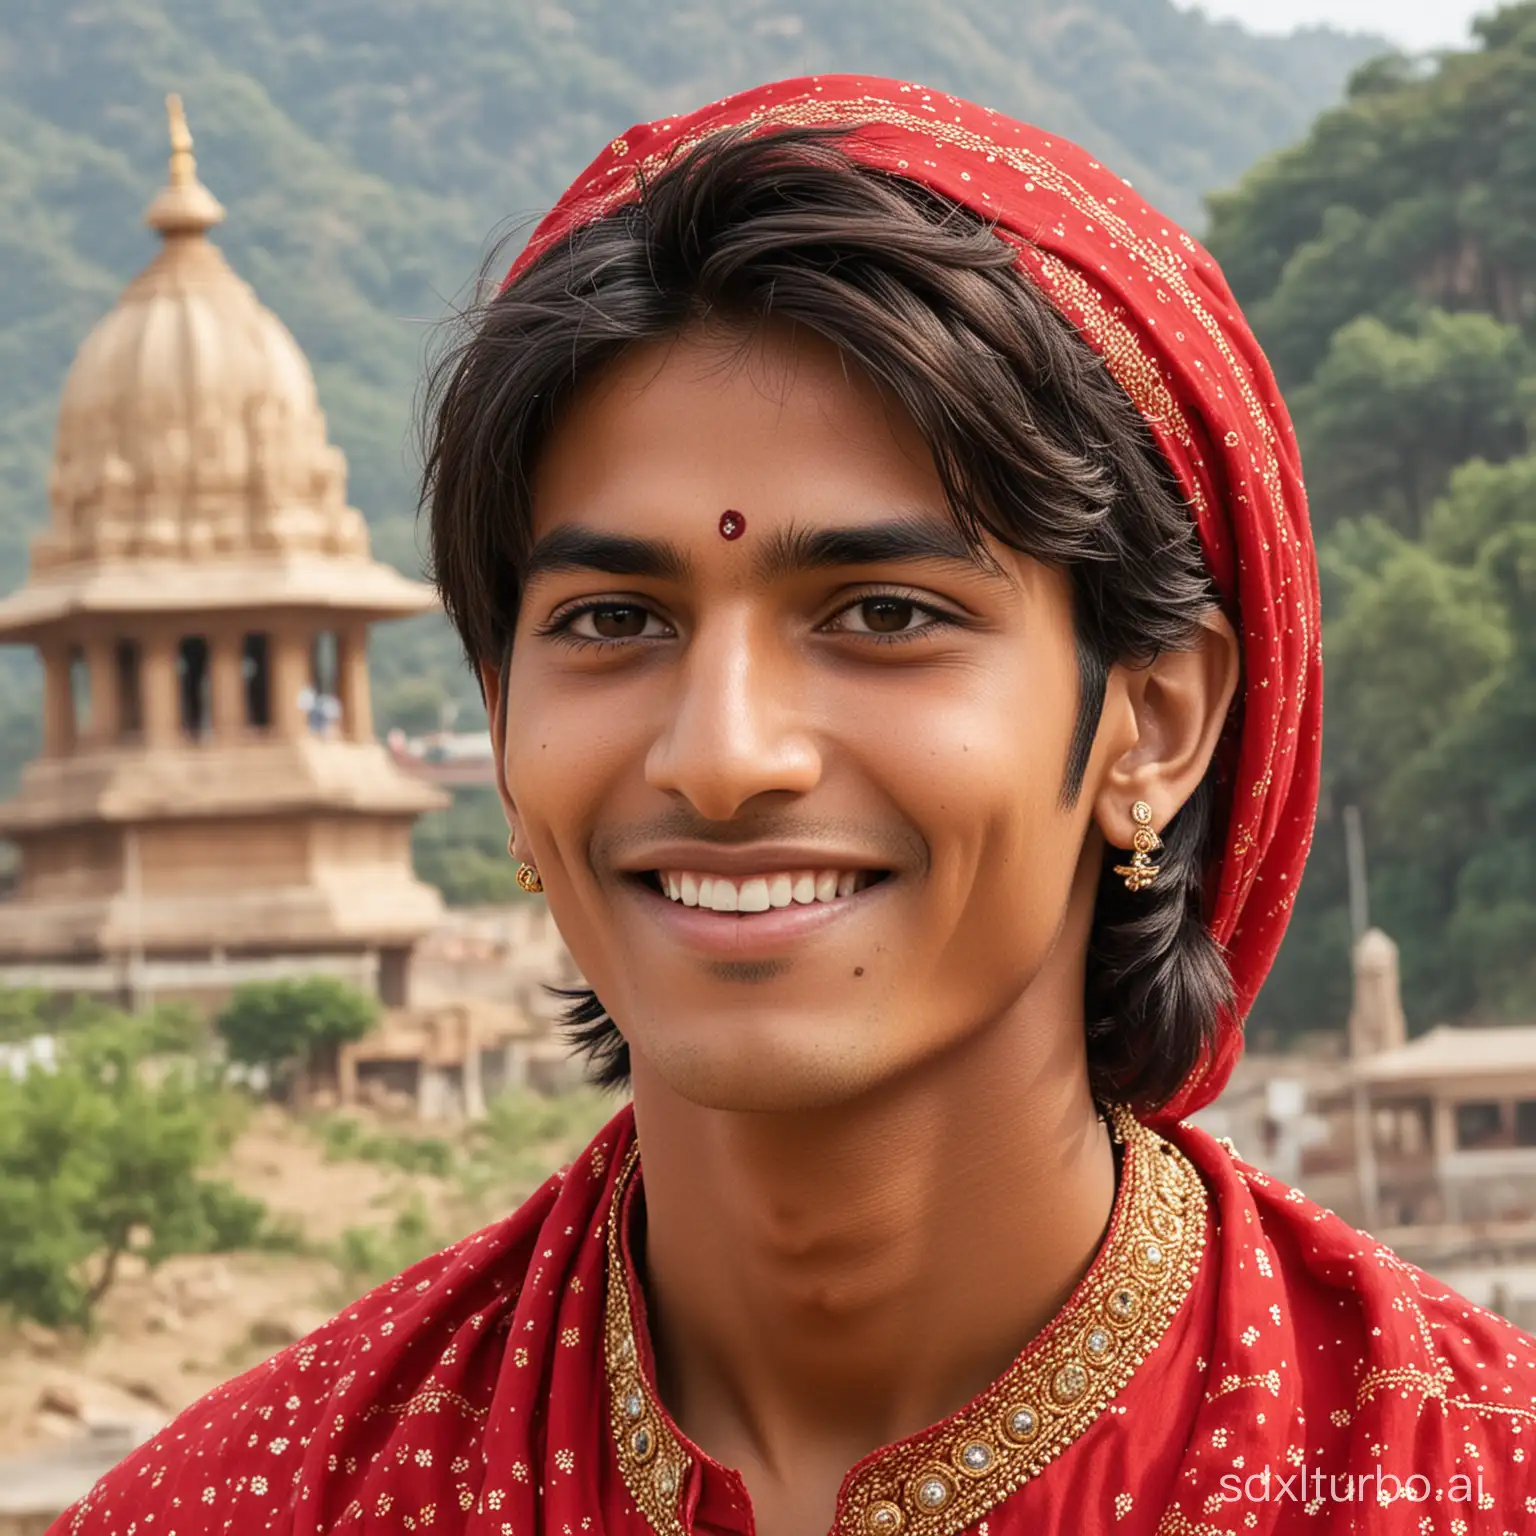 An Indian teenager, skinny boy with a little dark color and slightly long hair, not too much, a little muscular, approximately 20 years old, with a diamond face shape. He wears a red kurta and has a lot of blackheads on his face. His skin is darker, and he is not wearing any accessories on his ears. He is smiling and sitting in a temple, with the Indian Sharda Maa temple looking amazing in the background.